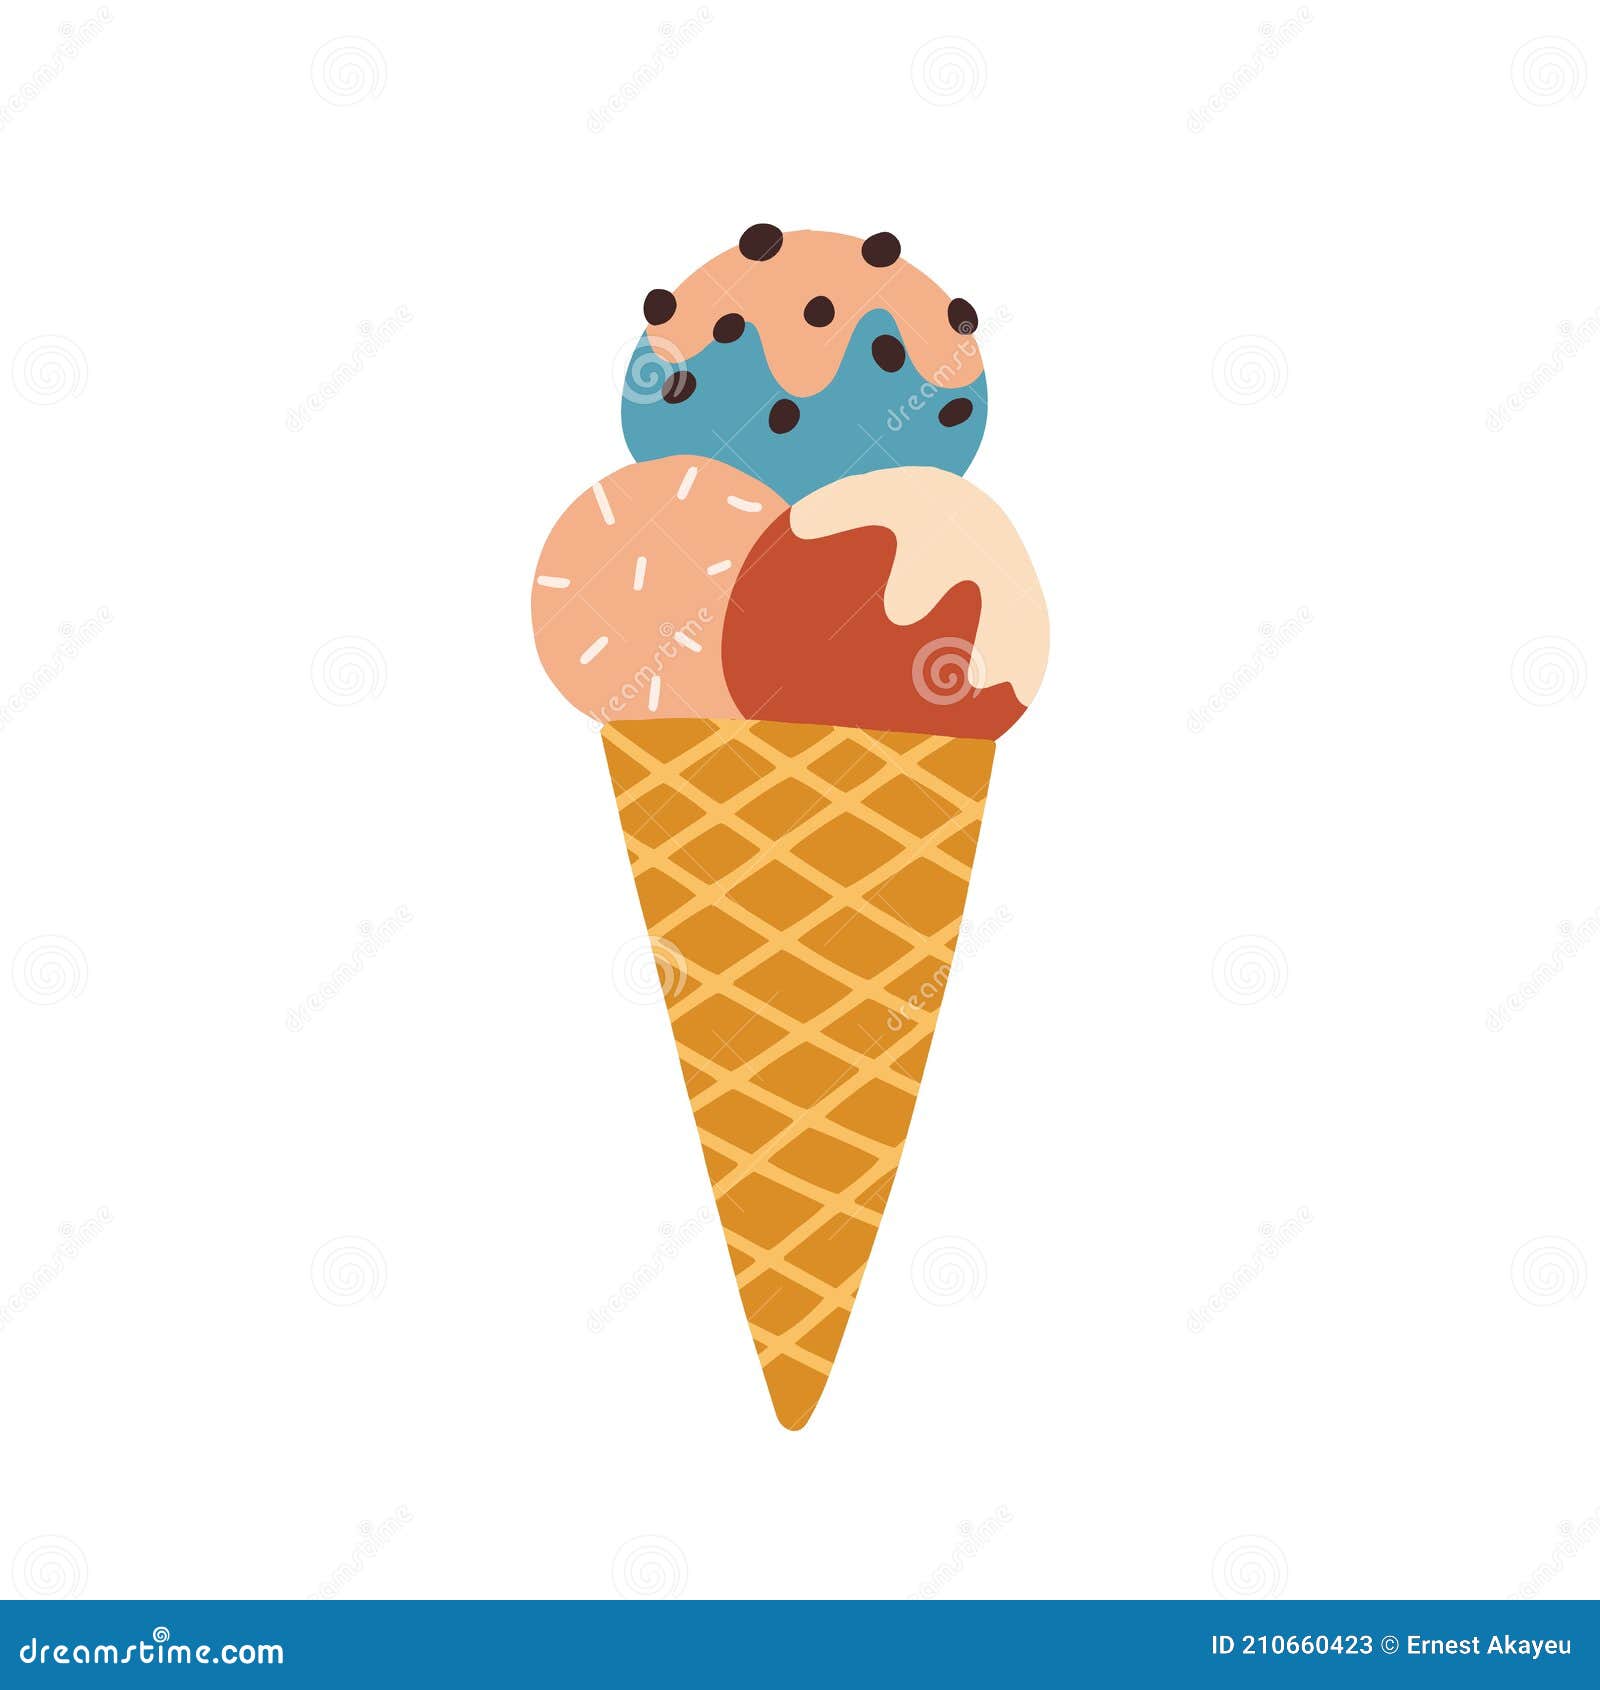 https://thumbs.dreamstime.com/z/waffle-cone-three-scoops-ice-cream-different-flavors-colorful-icecream-balls-sprinkling-colored-flat-vector-illustration-210660423.jpg